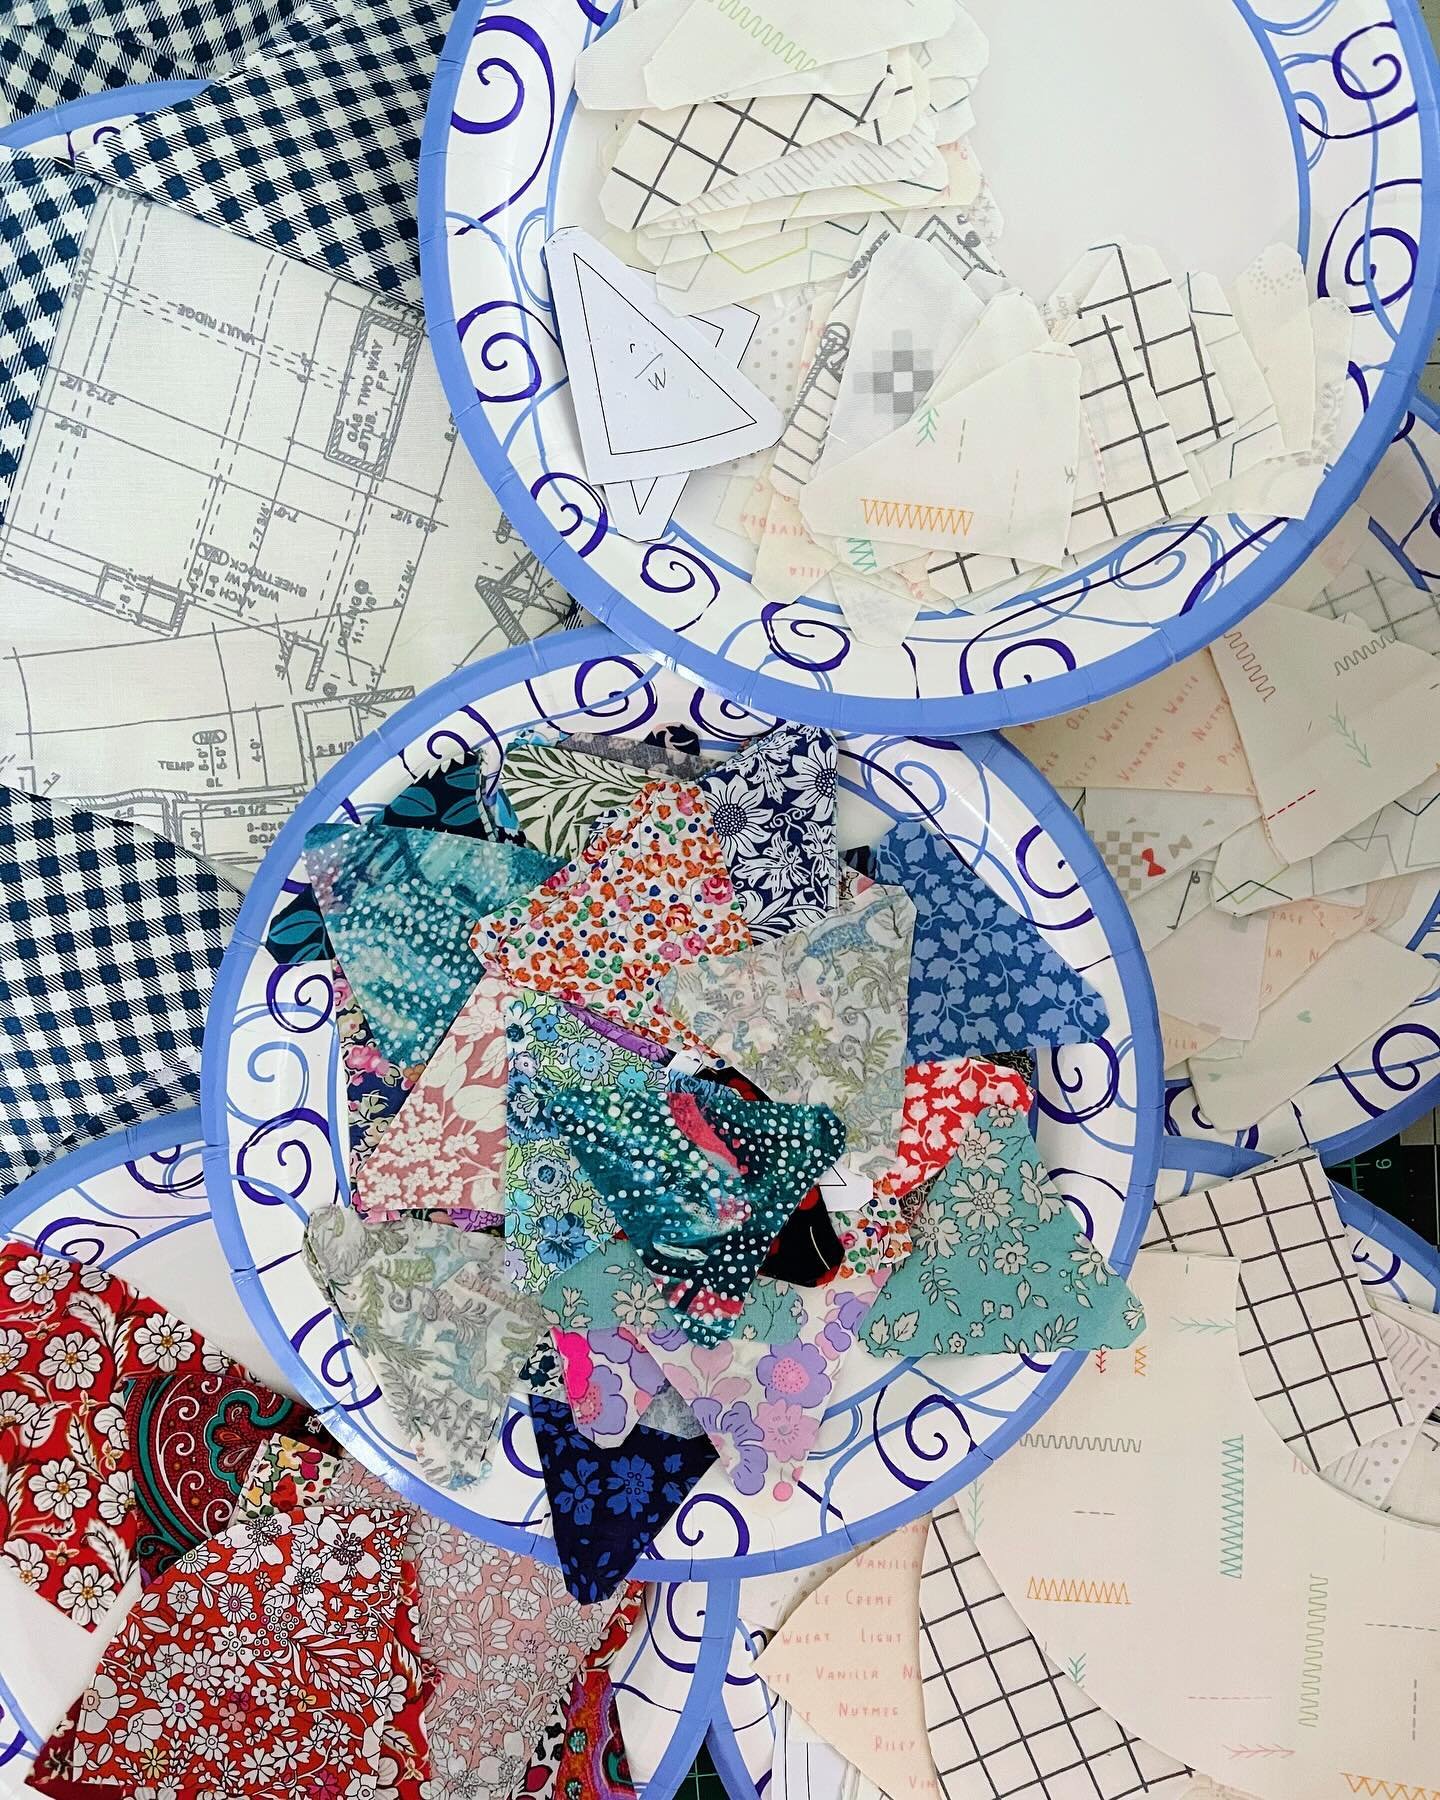 Today&rsquo;s quilting is all about controlled chaos. 

After pulling scraps, pressing, and cutting pieces for the Lydia Quilt, I&rsquo;m keeping things in order with paper plates. They&rsquo;re inexpensive, easy to store, and they make wrangling all